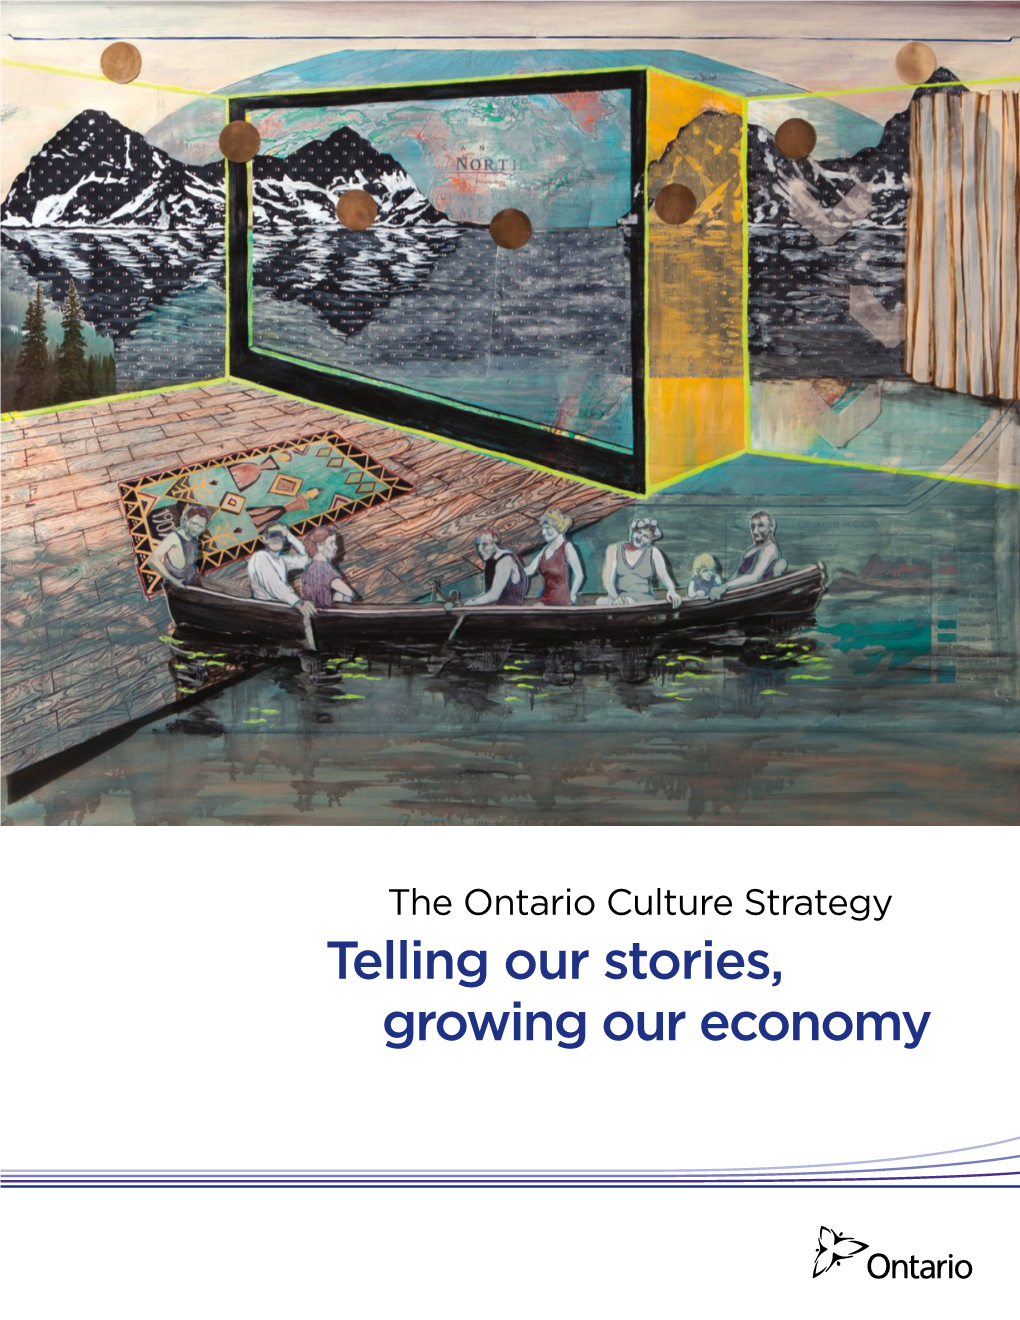 The Ontario Culture Strategy Telling Our Stories, Growing Our Economy